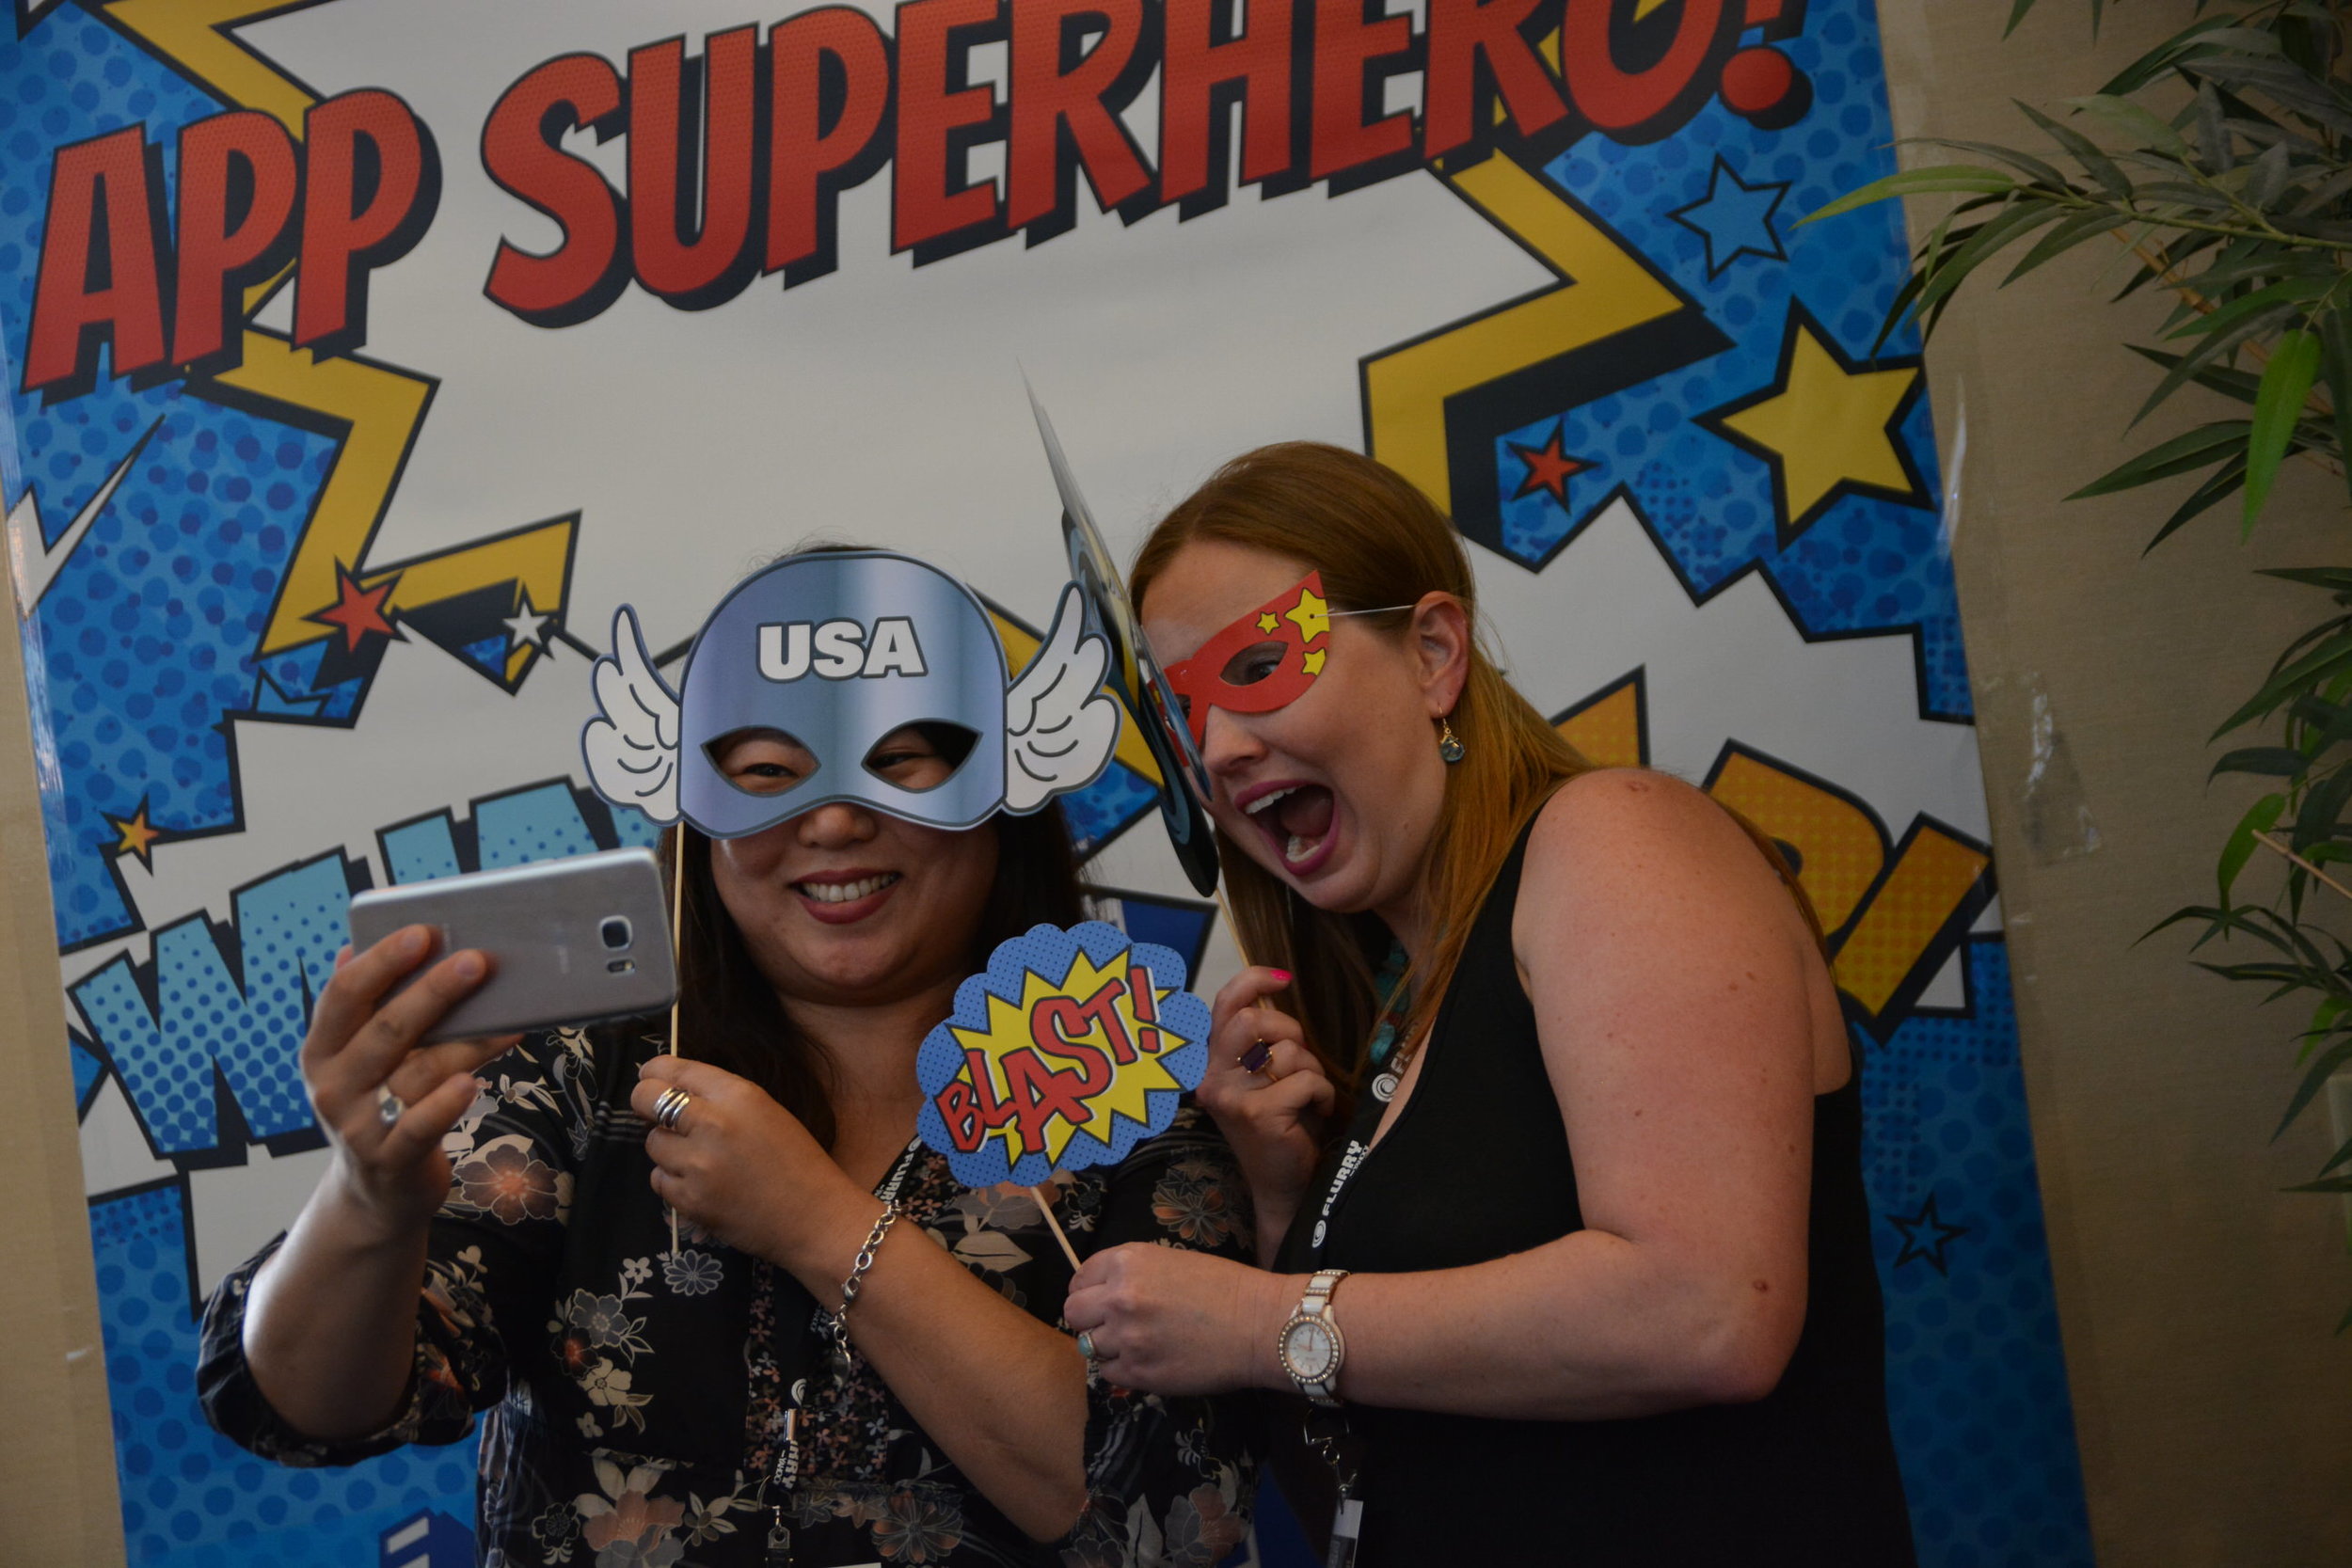 Our attendees loved our App Superhero booth!